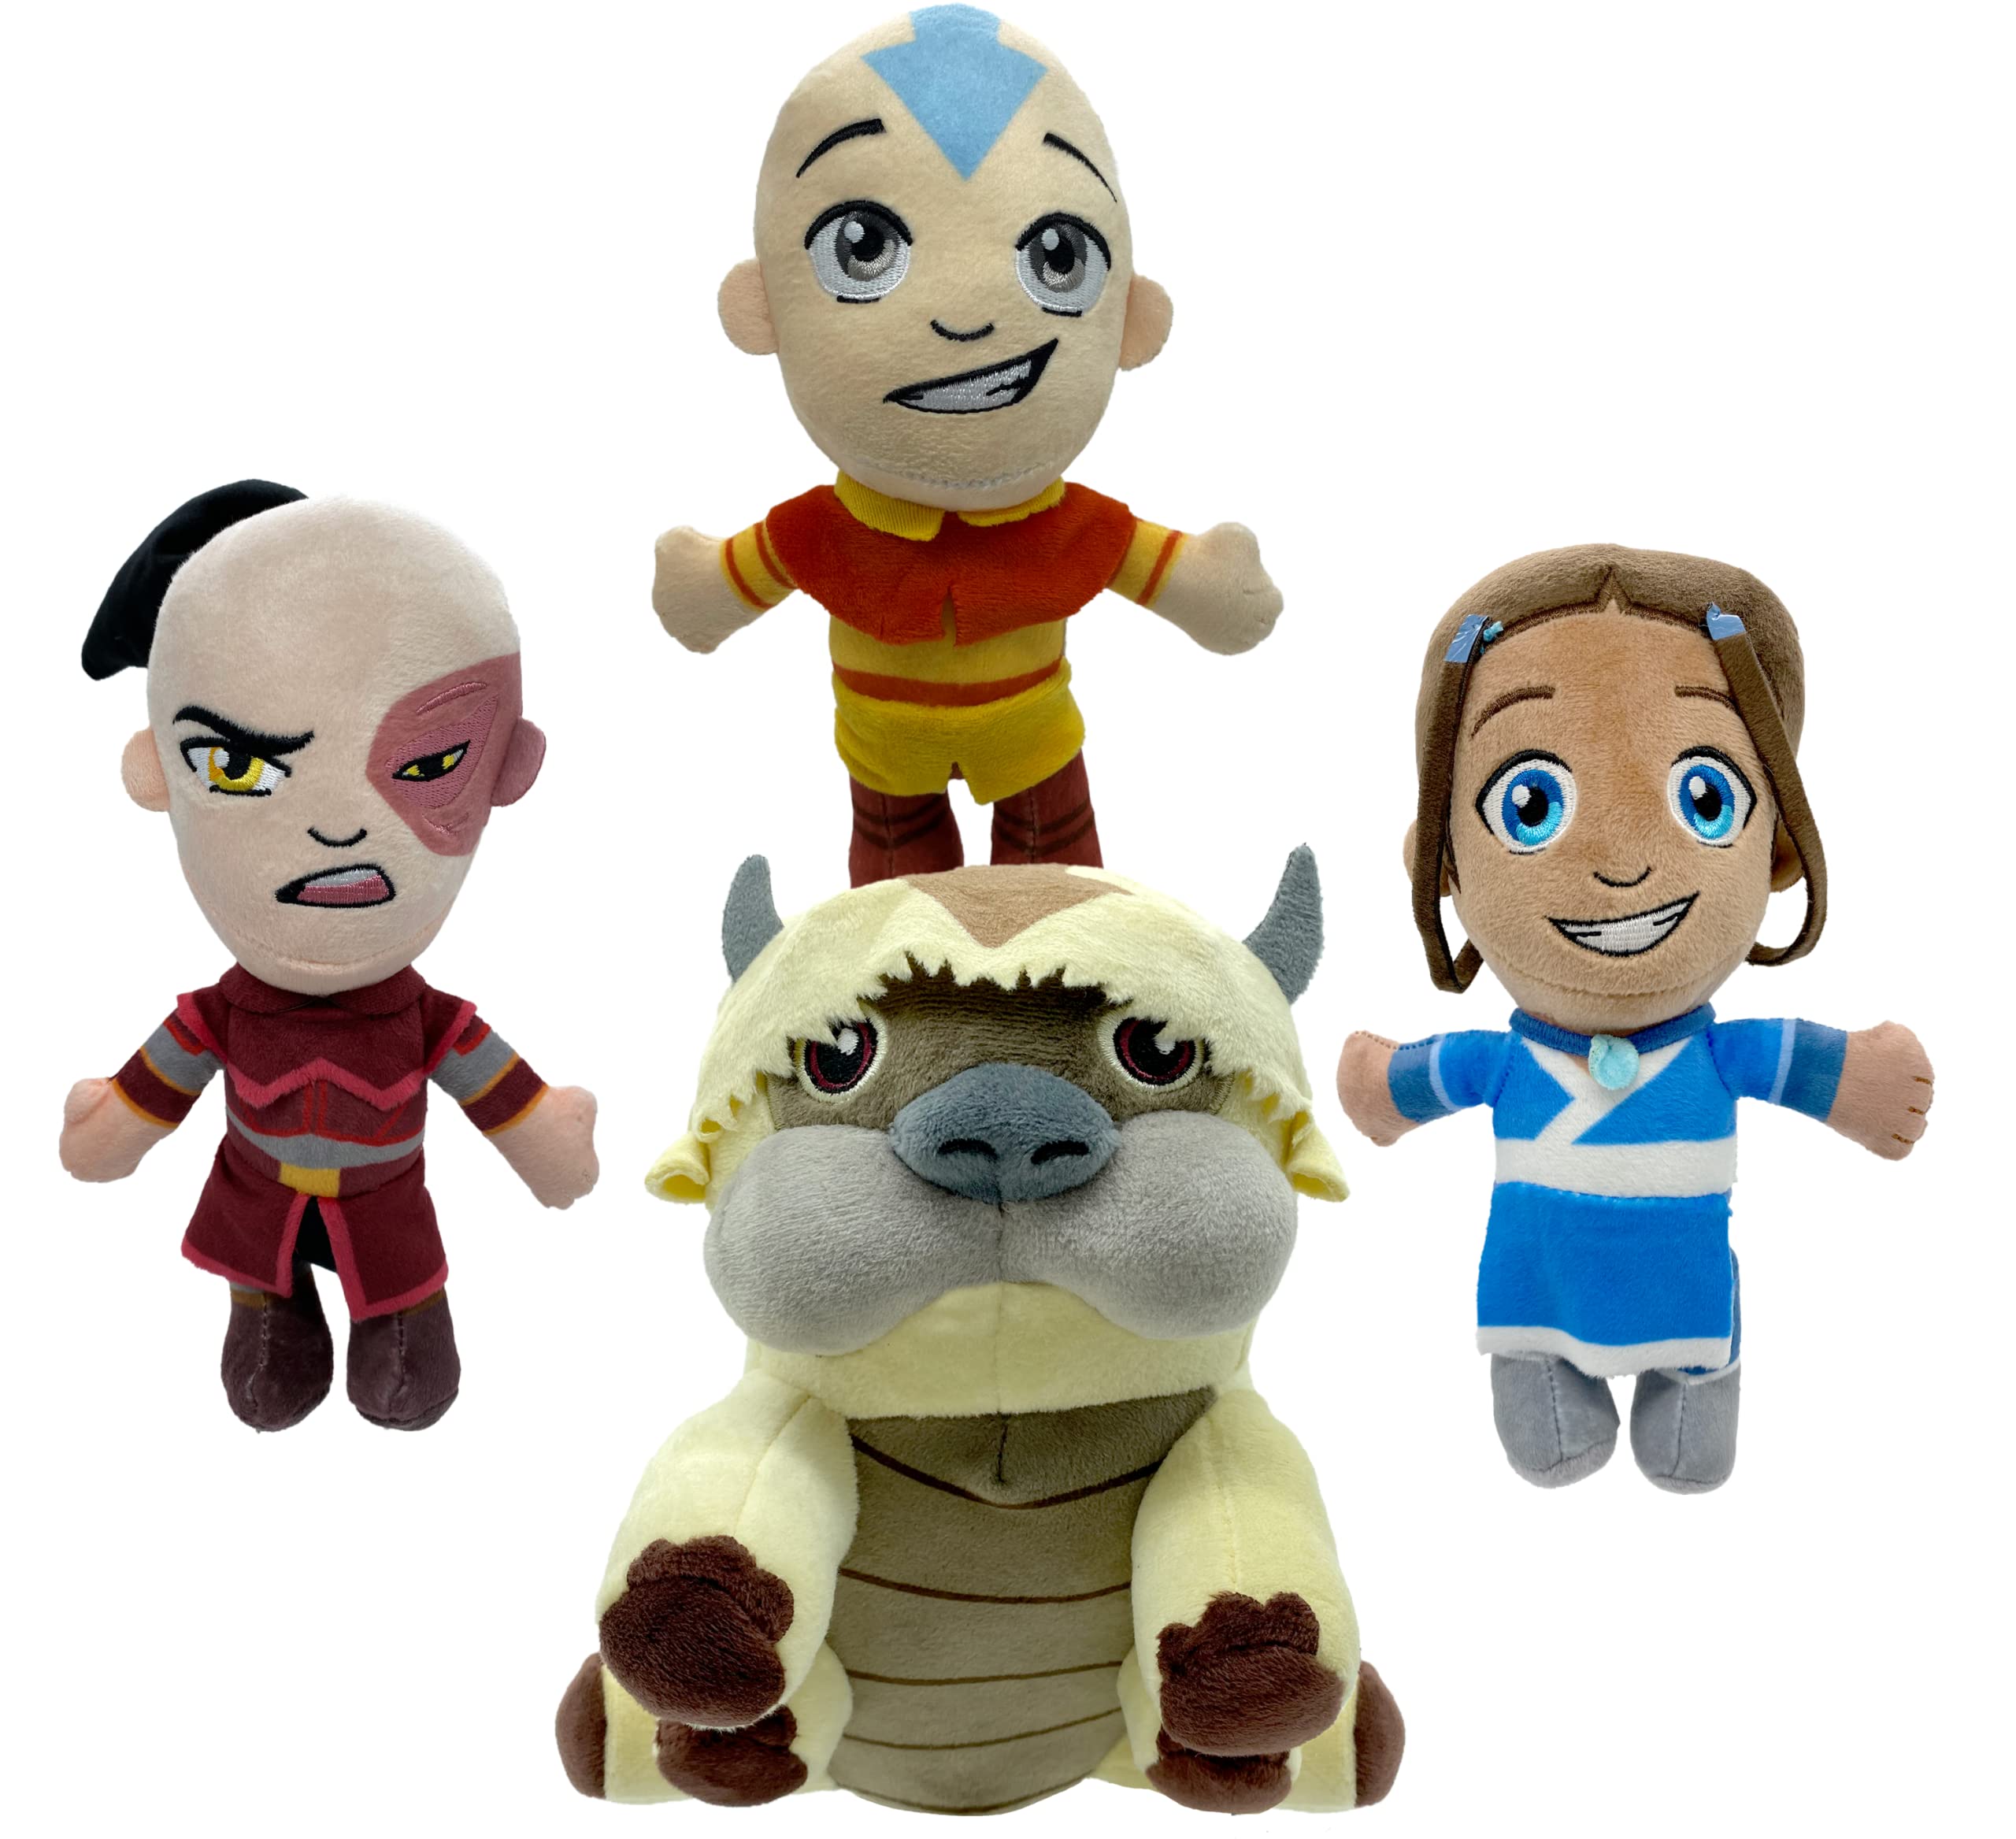 JINX Avatar: The Last Airbender Zuko Small Plush Toy, 7.5-in Stuffed Figure from Nickelodeon TV Series for Fans of All Ages